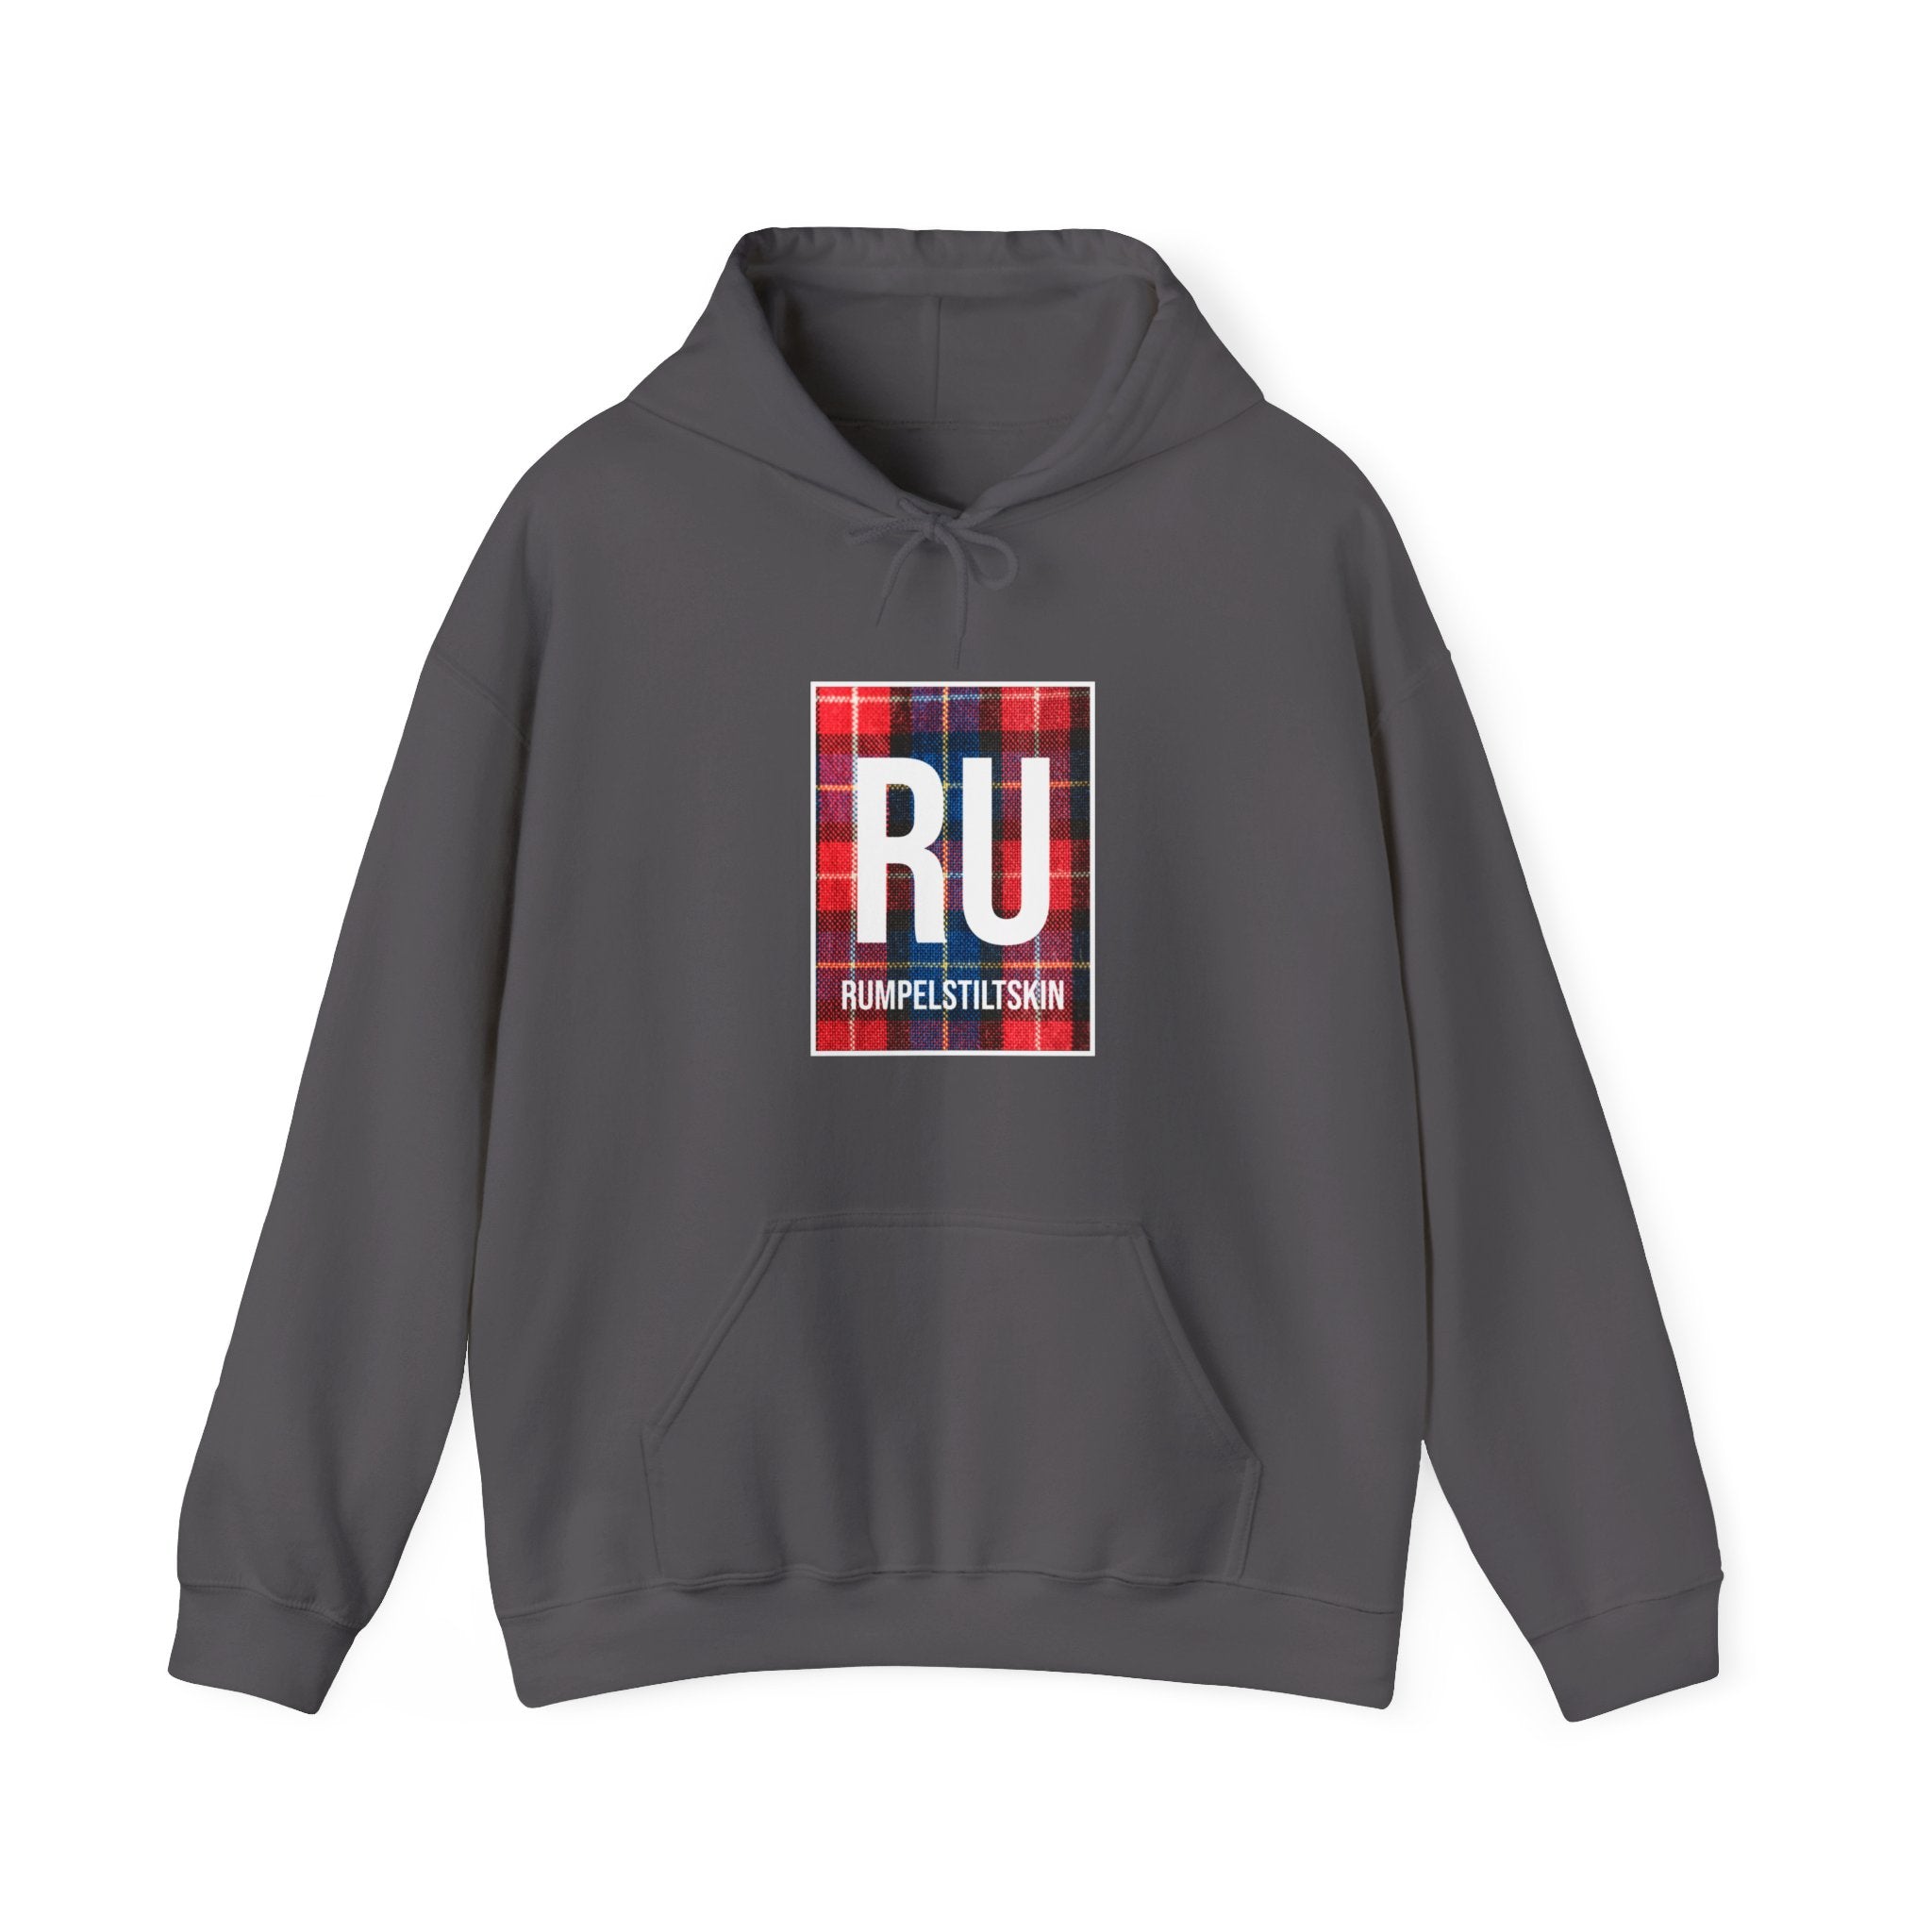 Experience ultimate comfort and style with this charcoal gray RU - Hooded Sweatshirt, featuring a front pouch and a red plaid graphic that reads "RU Rumpelstiltskin" on the chest.